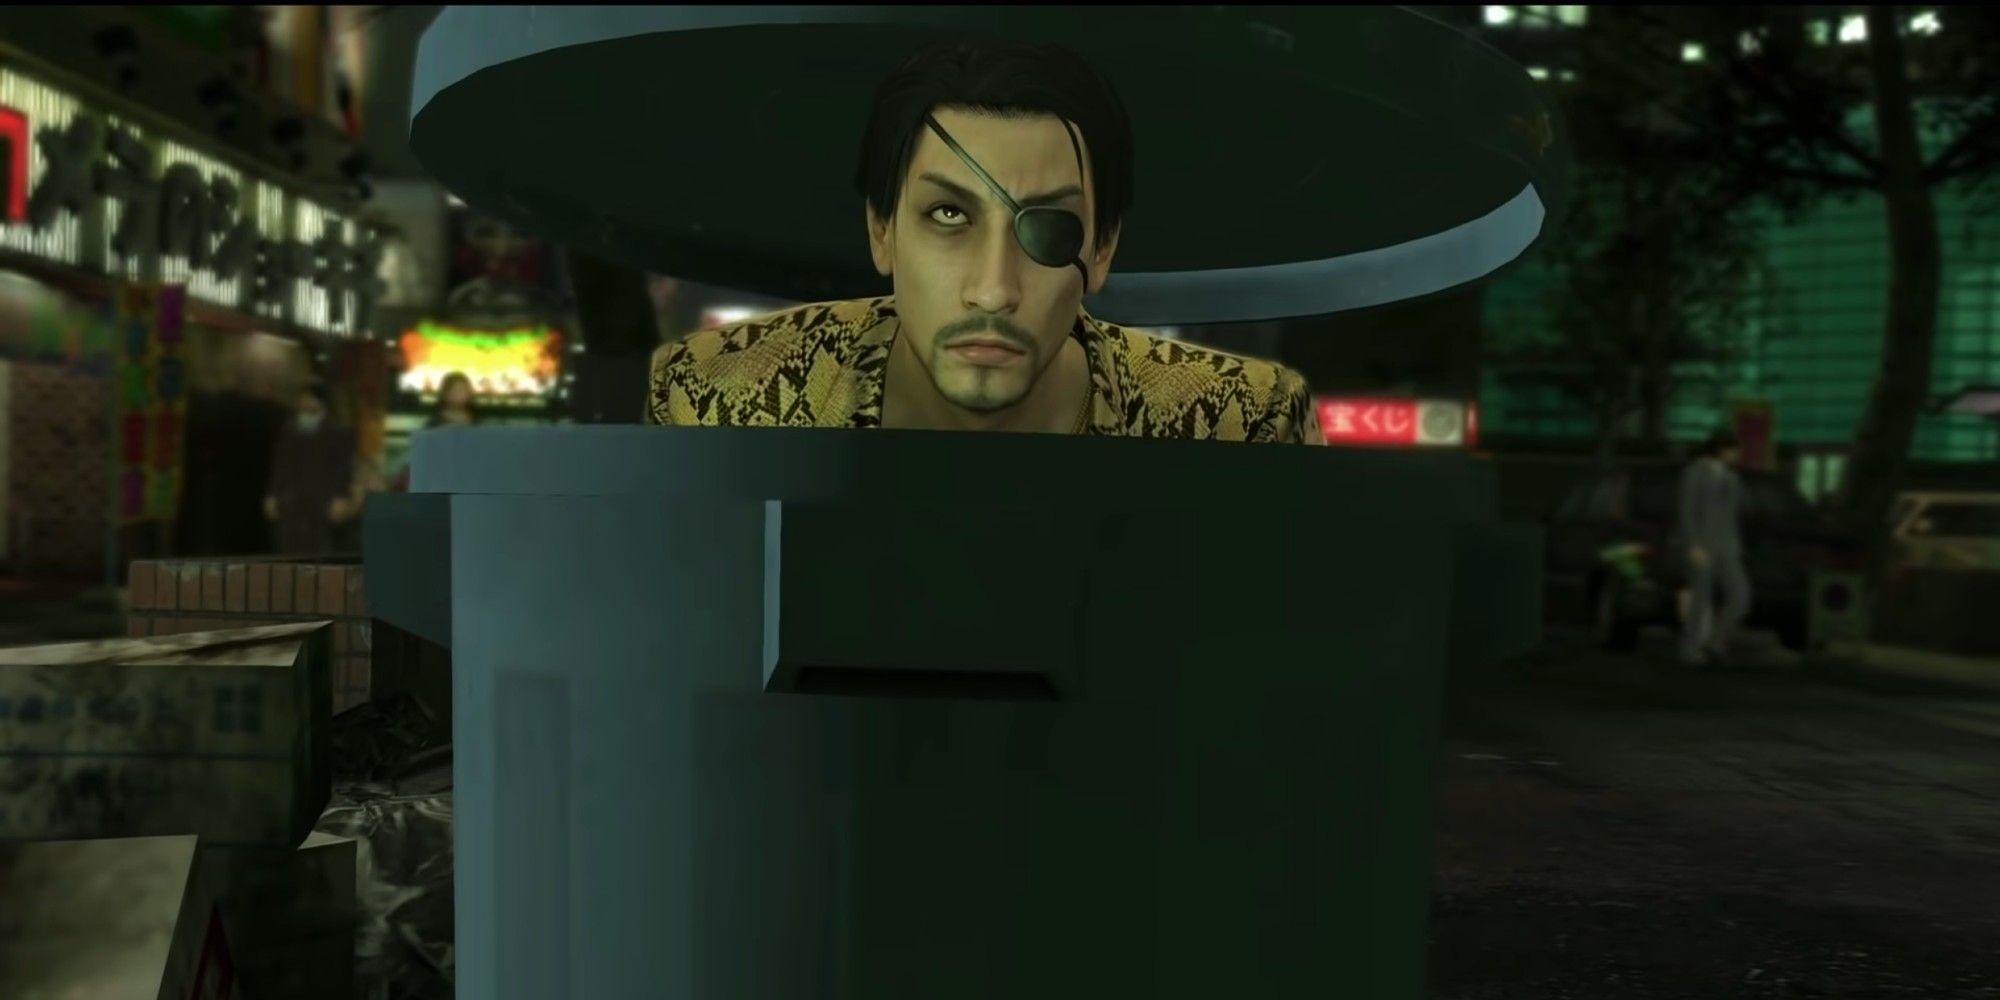 Majima pops out of a trash can